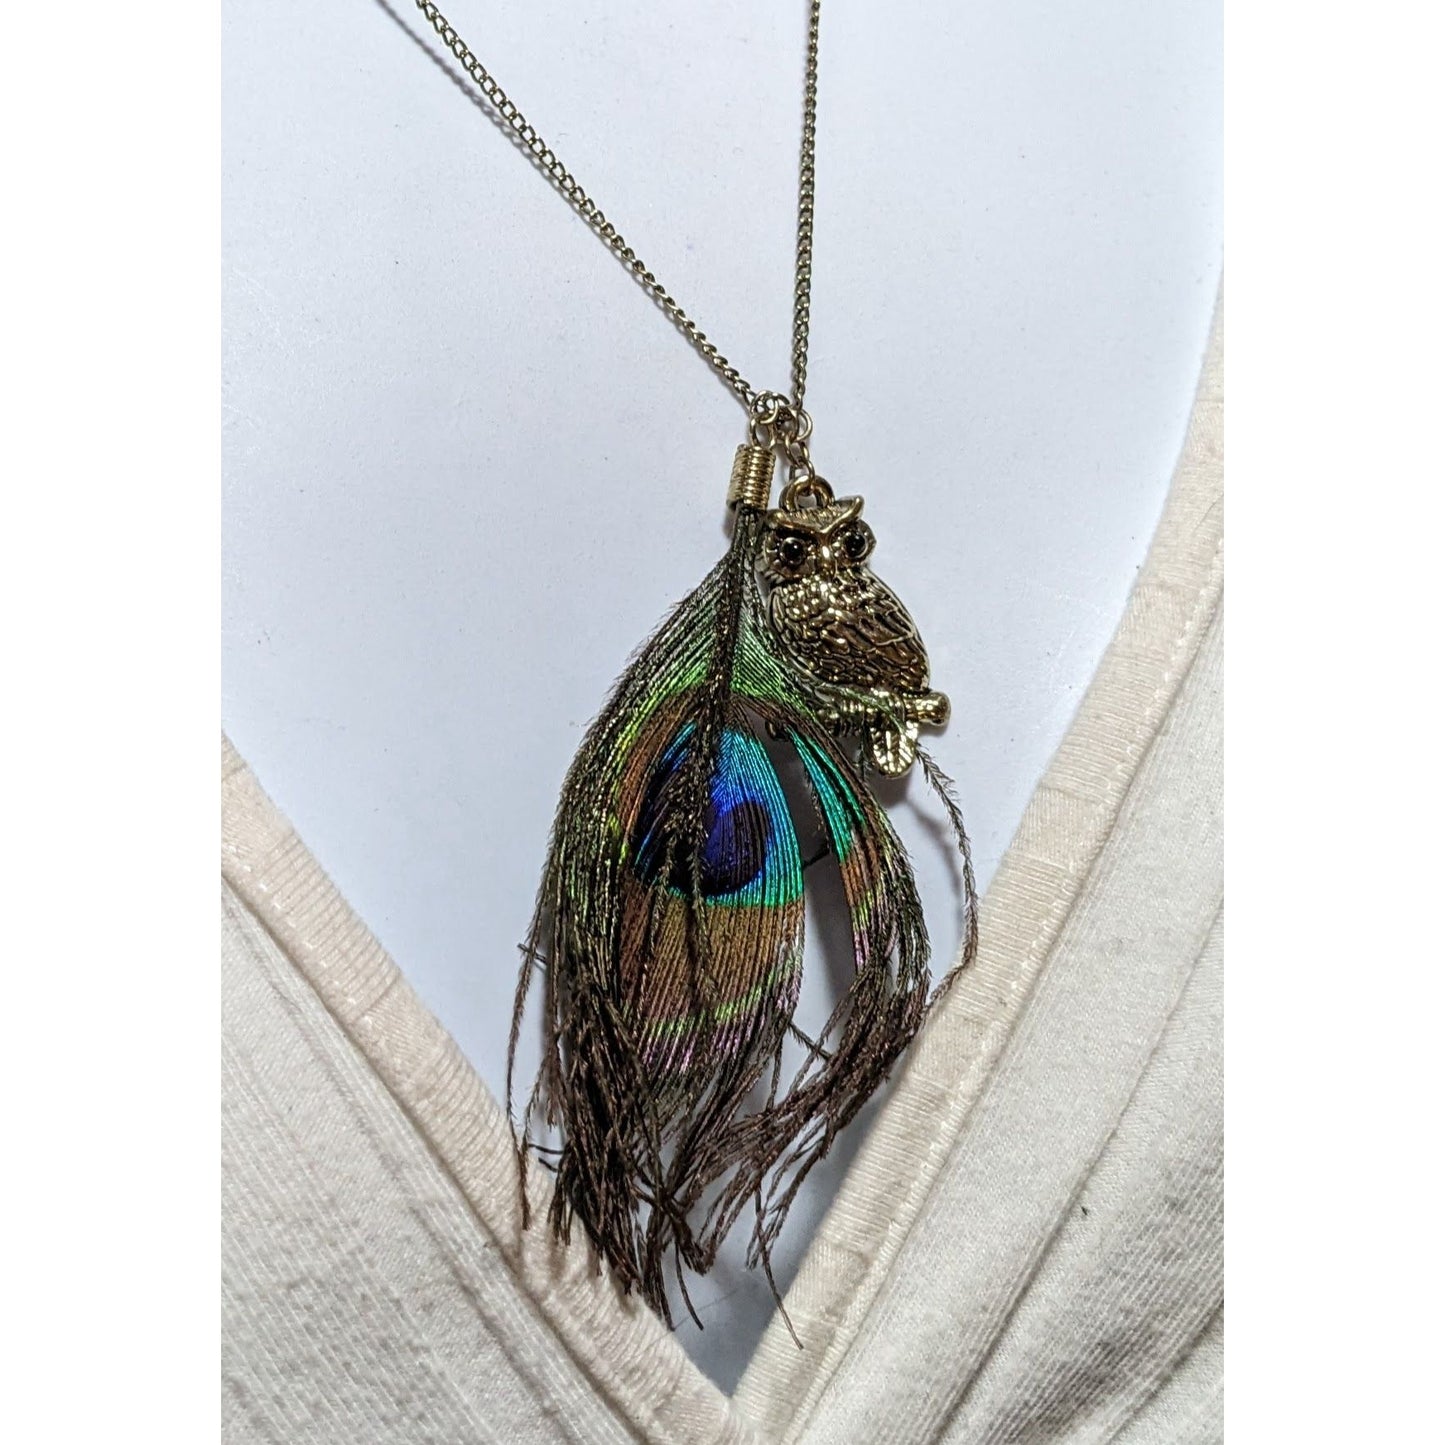 Peacock Feather Owl Charm Necklace